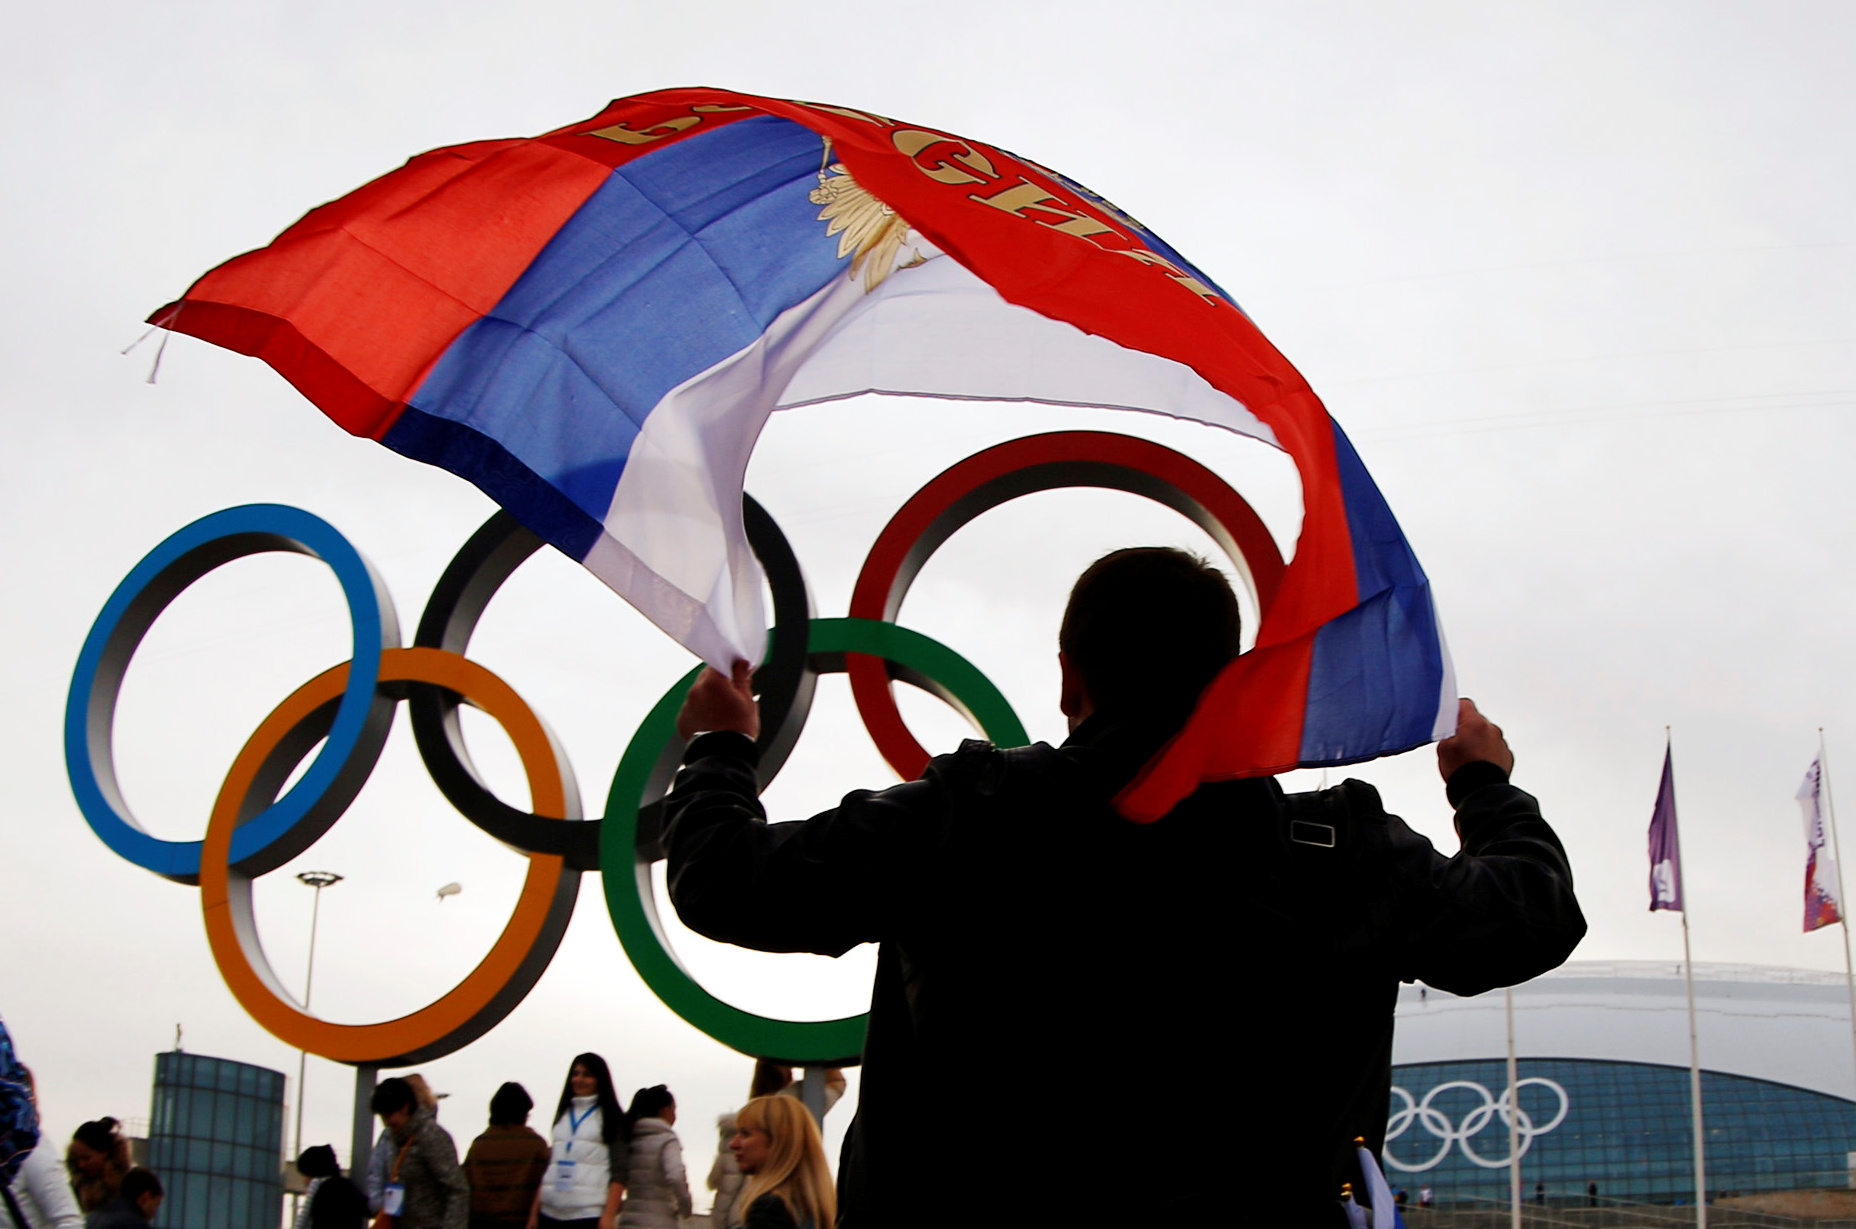 FILE PHOTO: A man carries the Russian flag past the Olympic rings at the Olympic Park during the 2014 Sochi Winter Olympics February 22, 2014. World Anti-Doping Agency has banned on December 9, 2019 Russian athletes from all major sporting events in the next four years.  REUTERS/Brian Snyder/File Photo